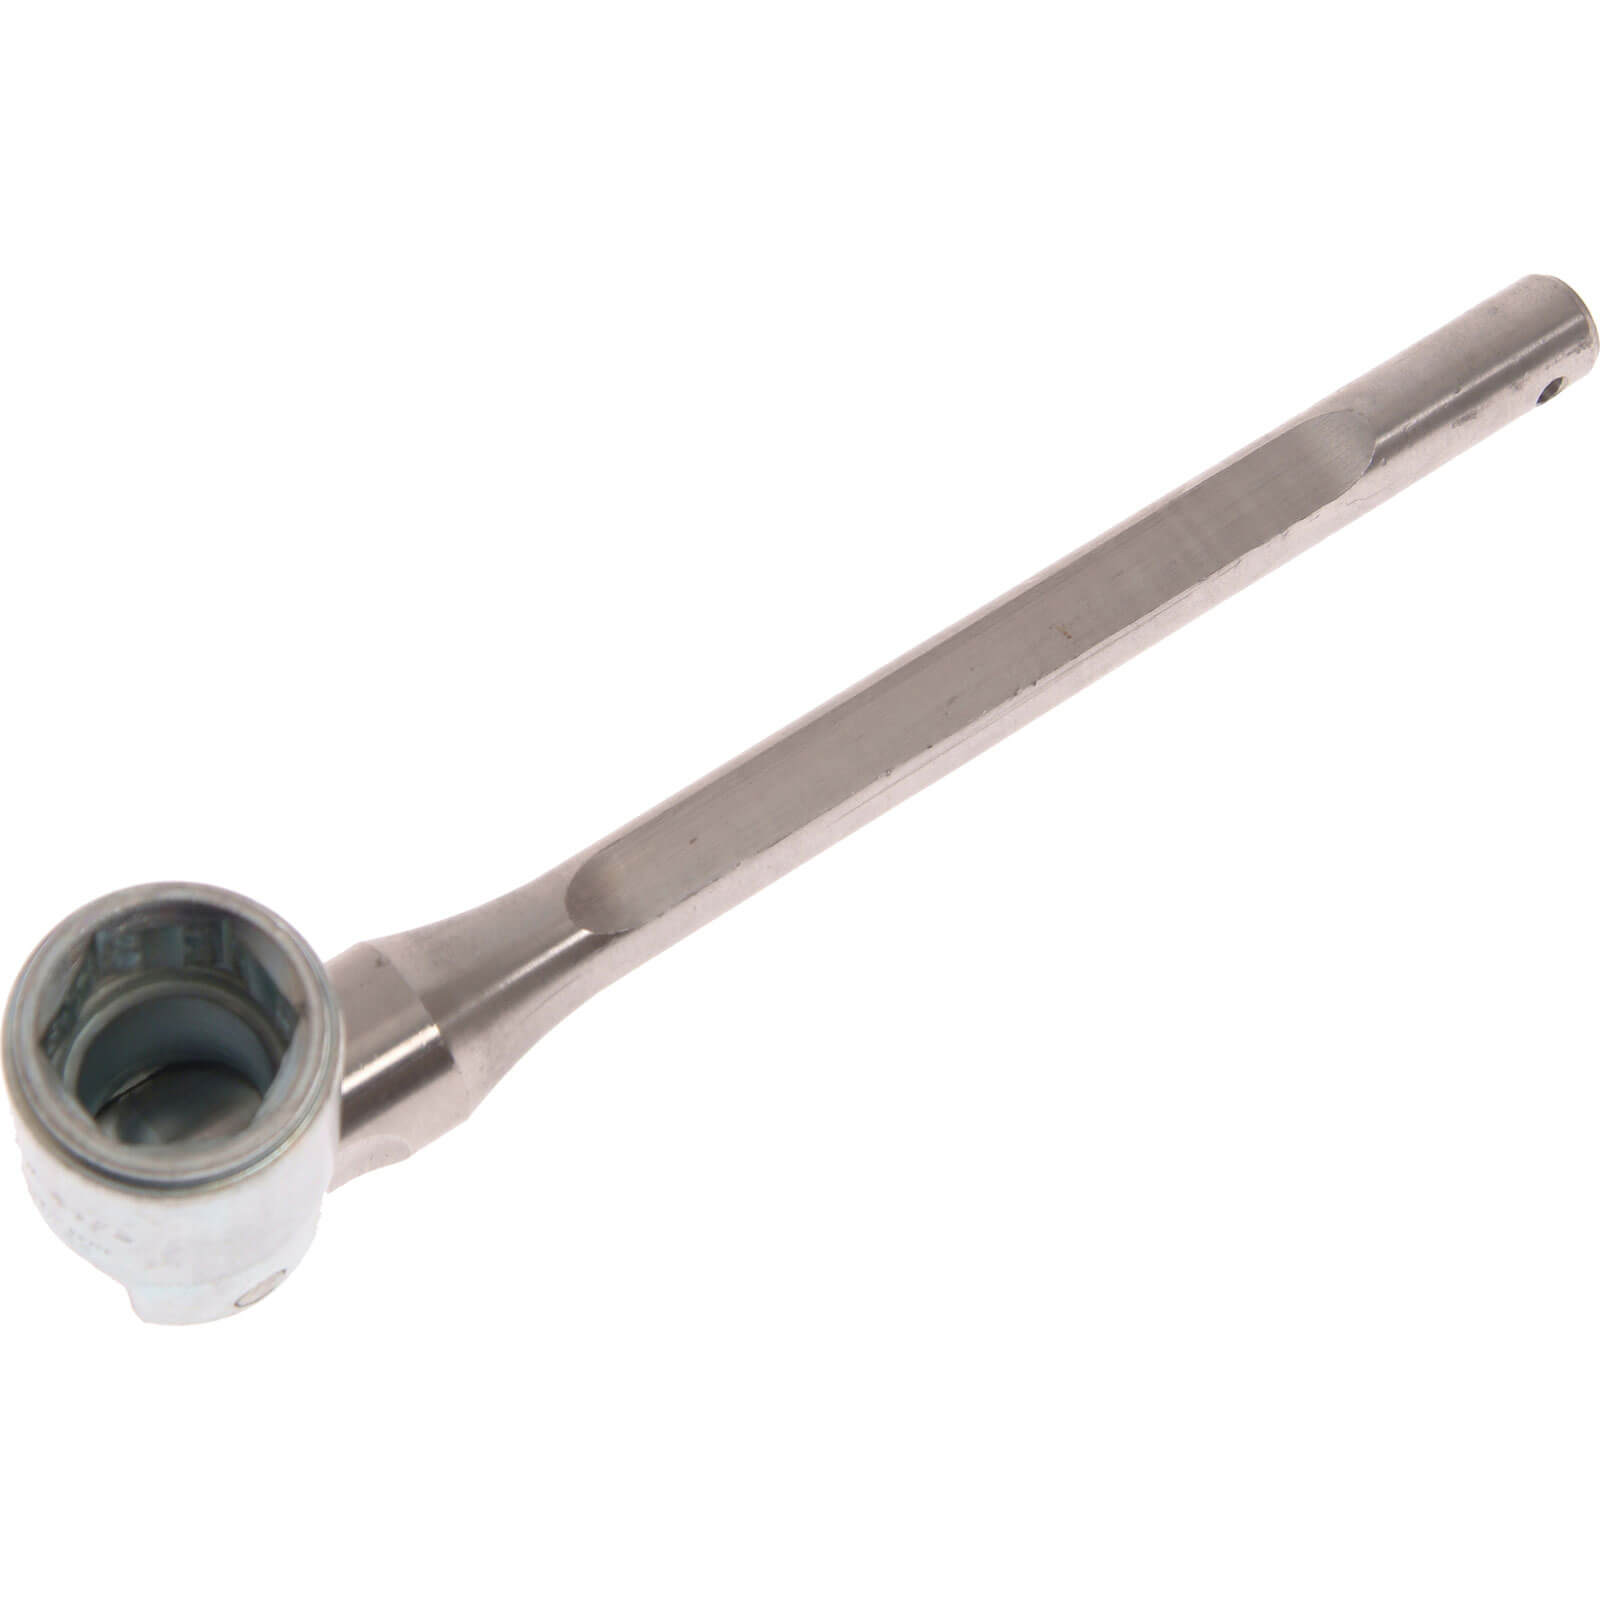 Image of Priory 383 Stainless Steel Scaffold Spanner Whitworth 7/16" Flat Steel Socket